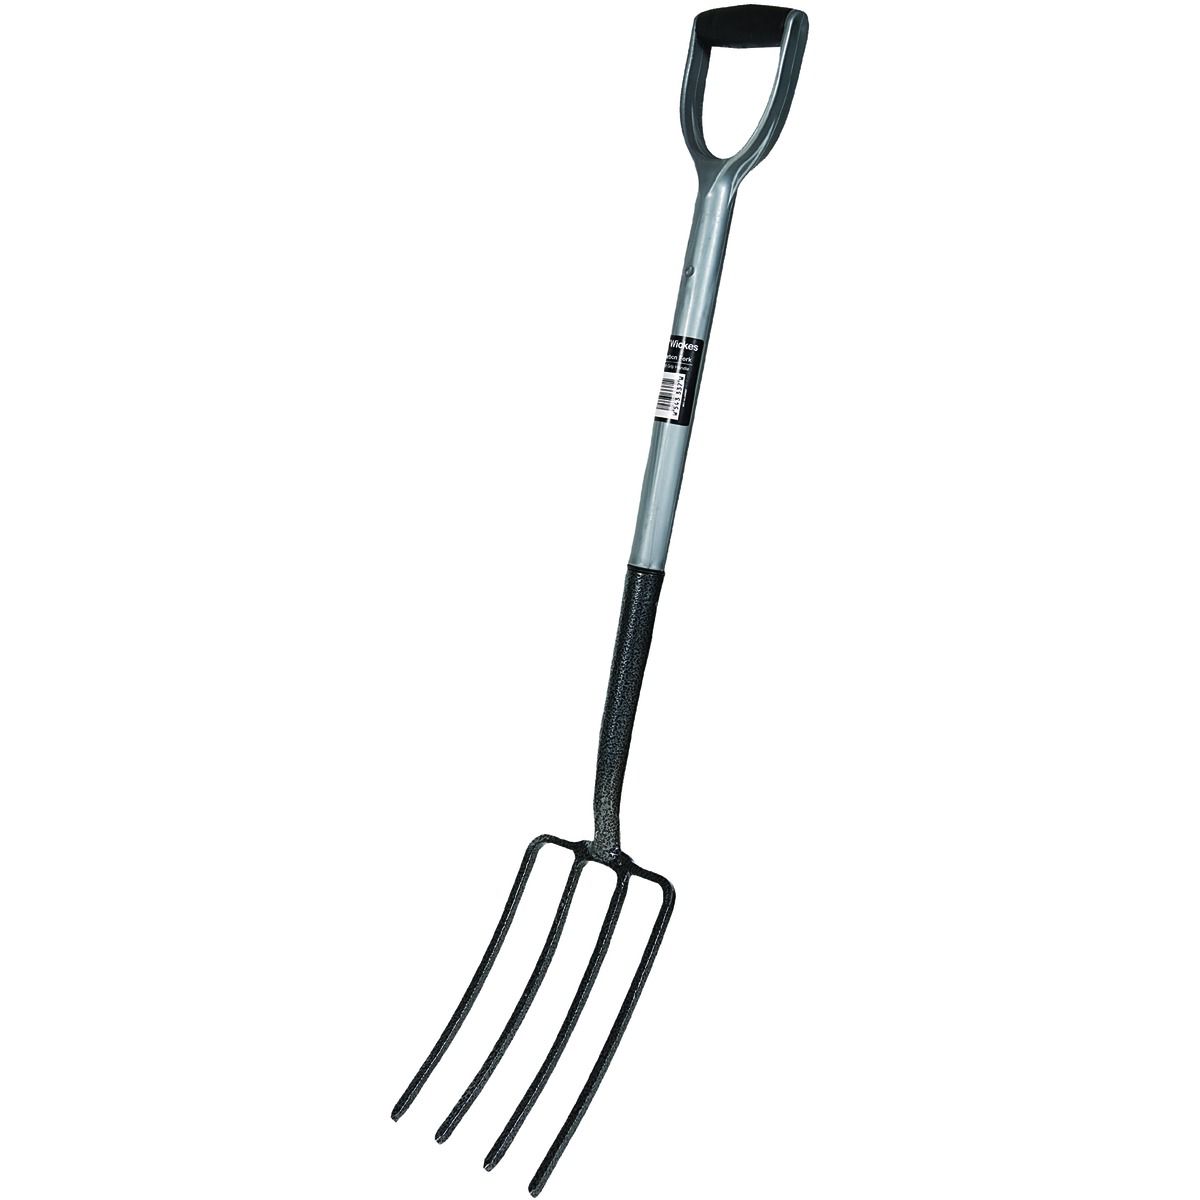 Image of Wickes Carbon Steel Powagrip Garden Digging Fork - 995mm